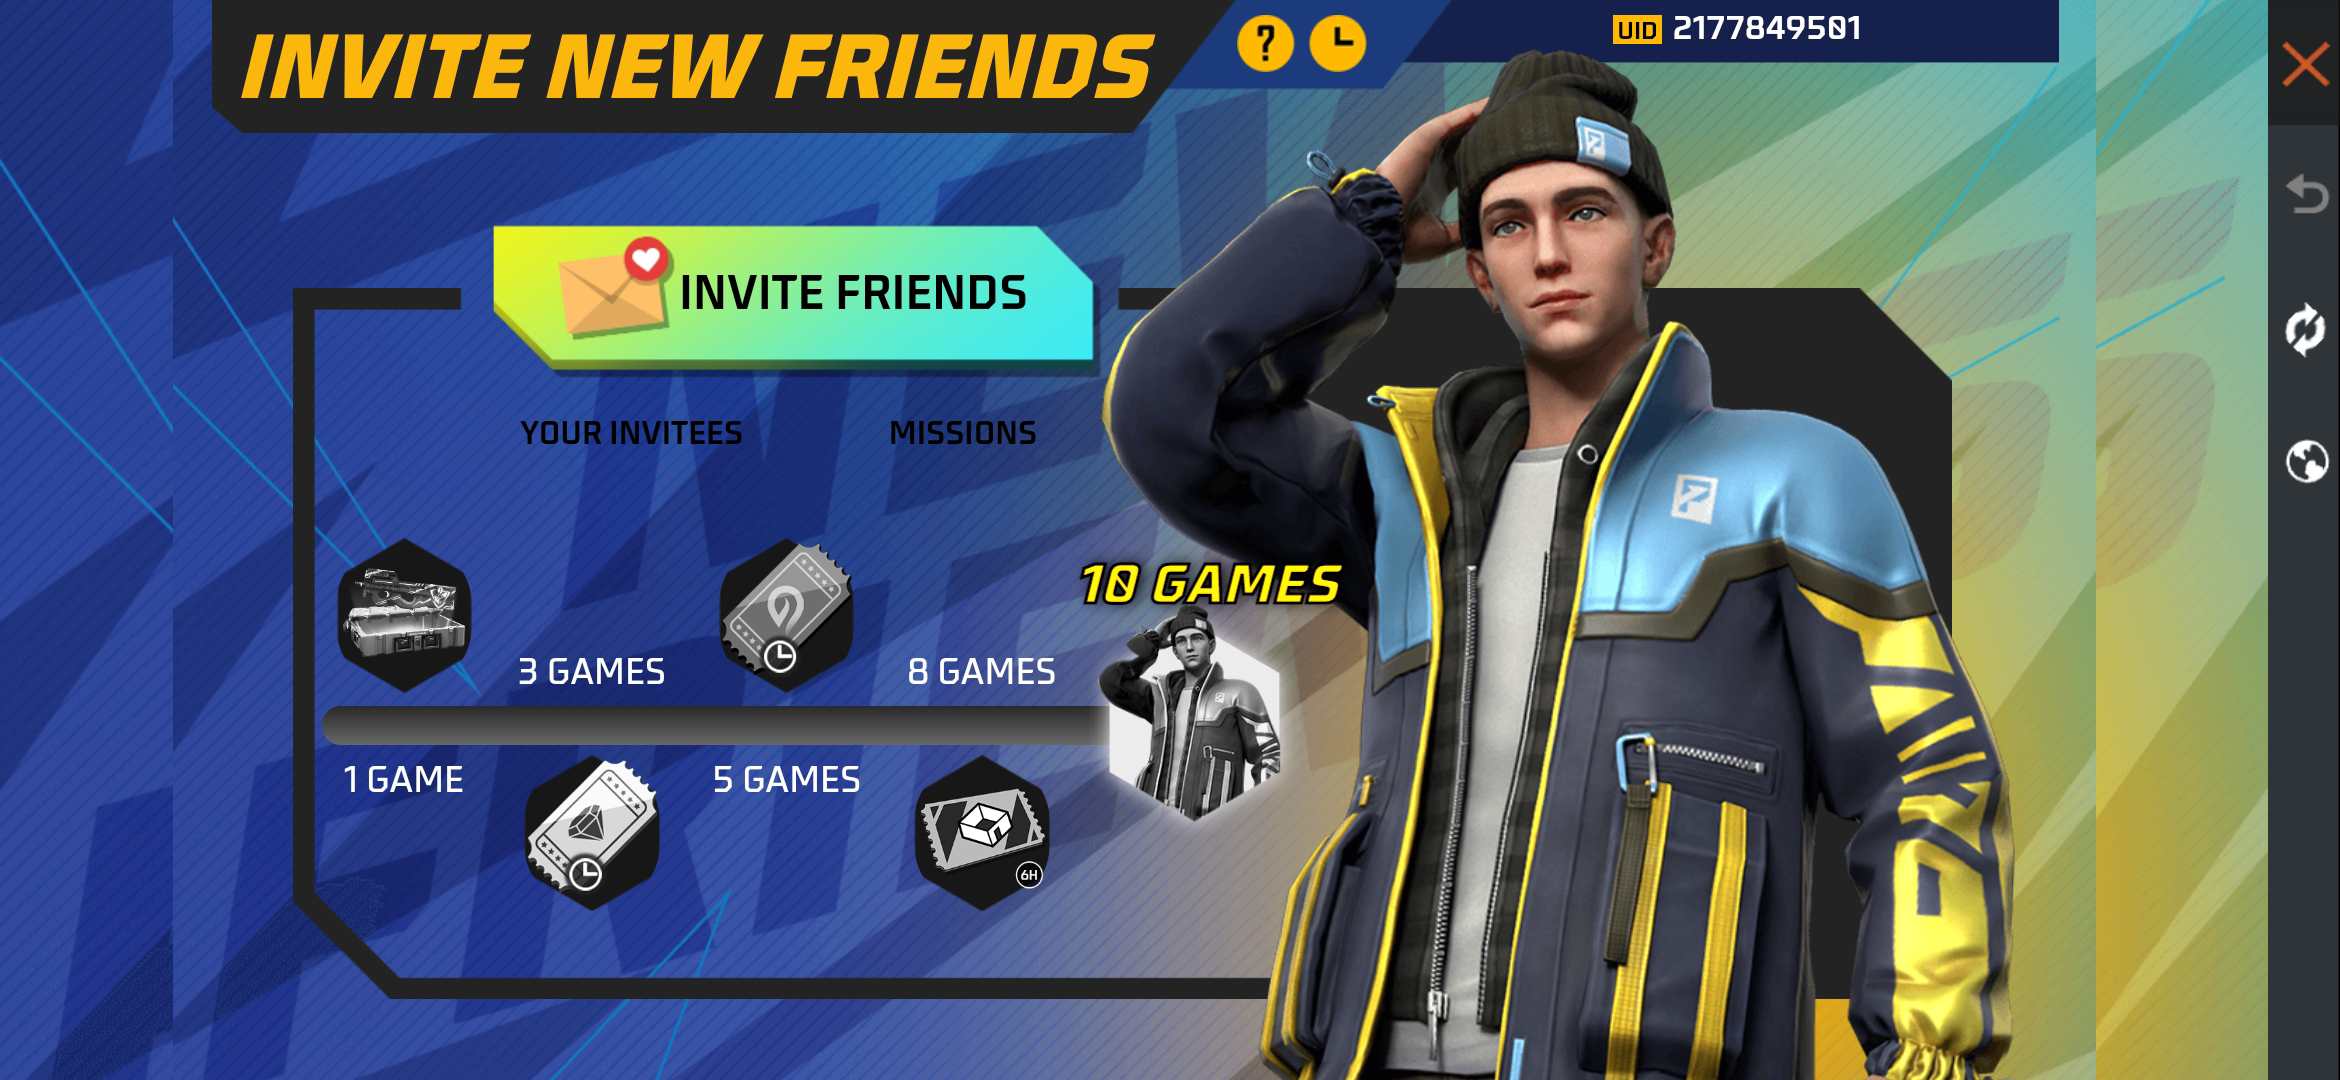 Invite Your Friends And Win Bundle In Free Fire: Here’s How